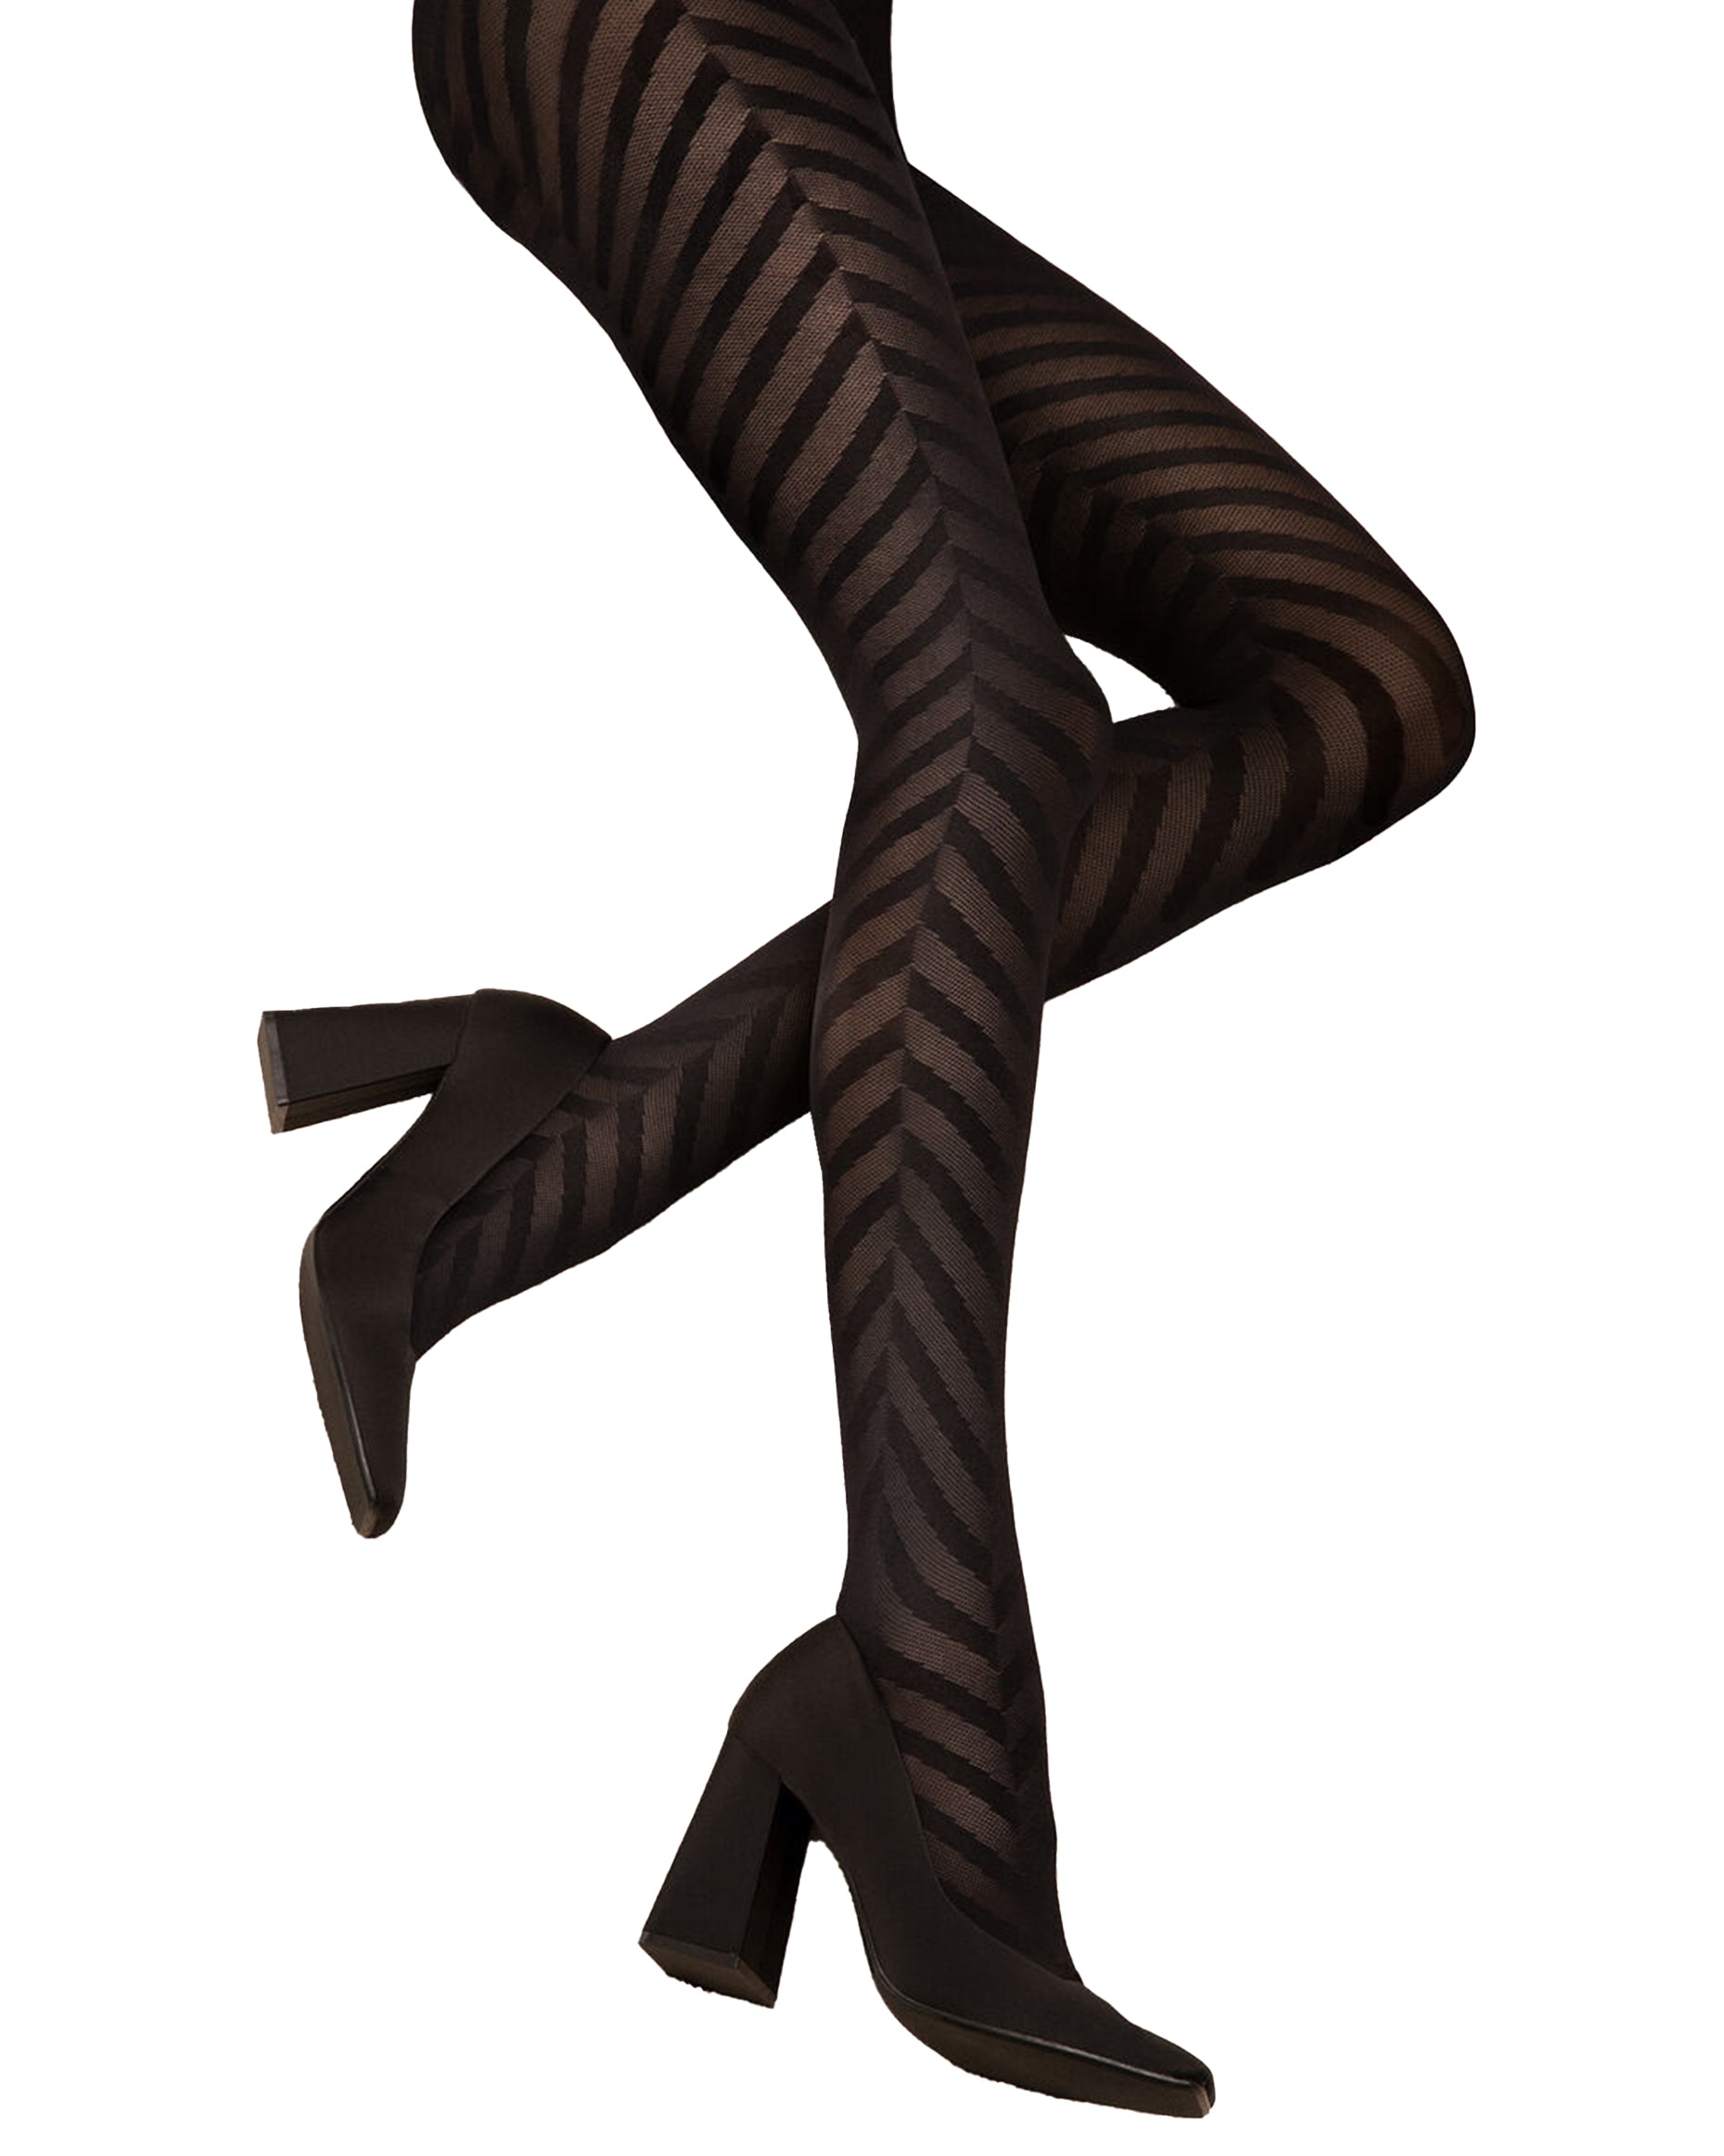 Fiore Black Chance Tights - Black semi-opaque fashion tights with a large linear herringbone style pattern, worn with block heel shoes.